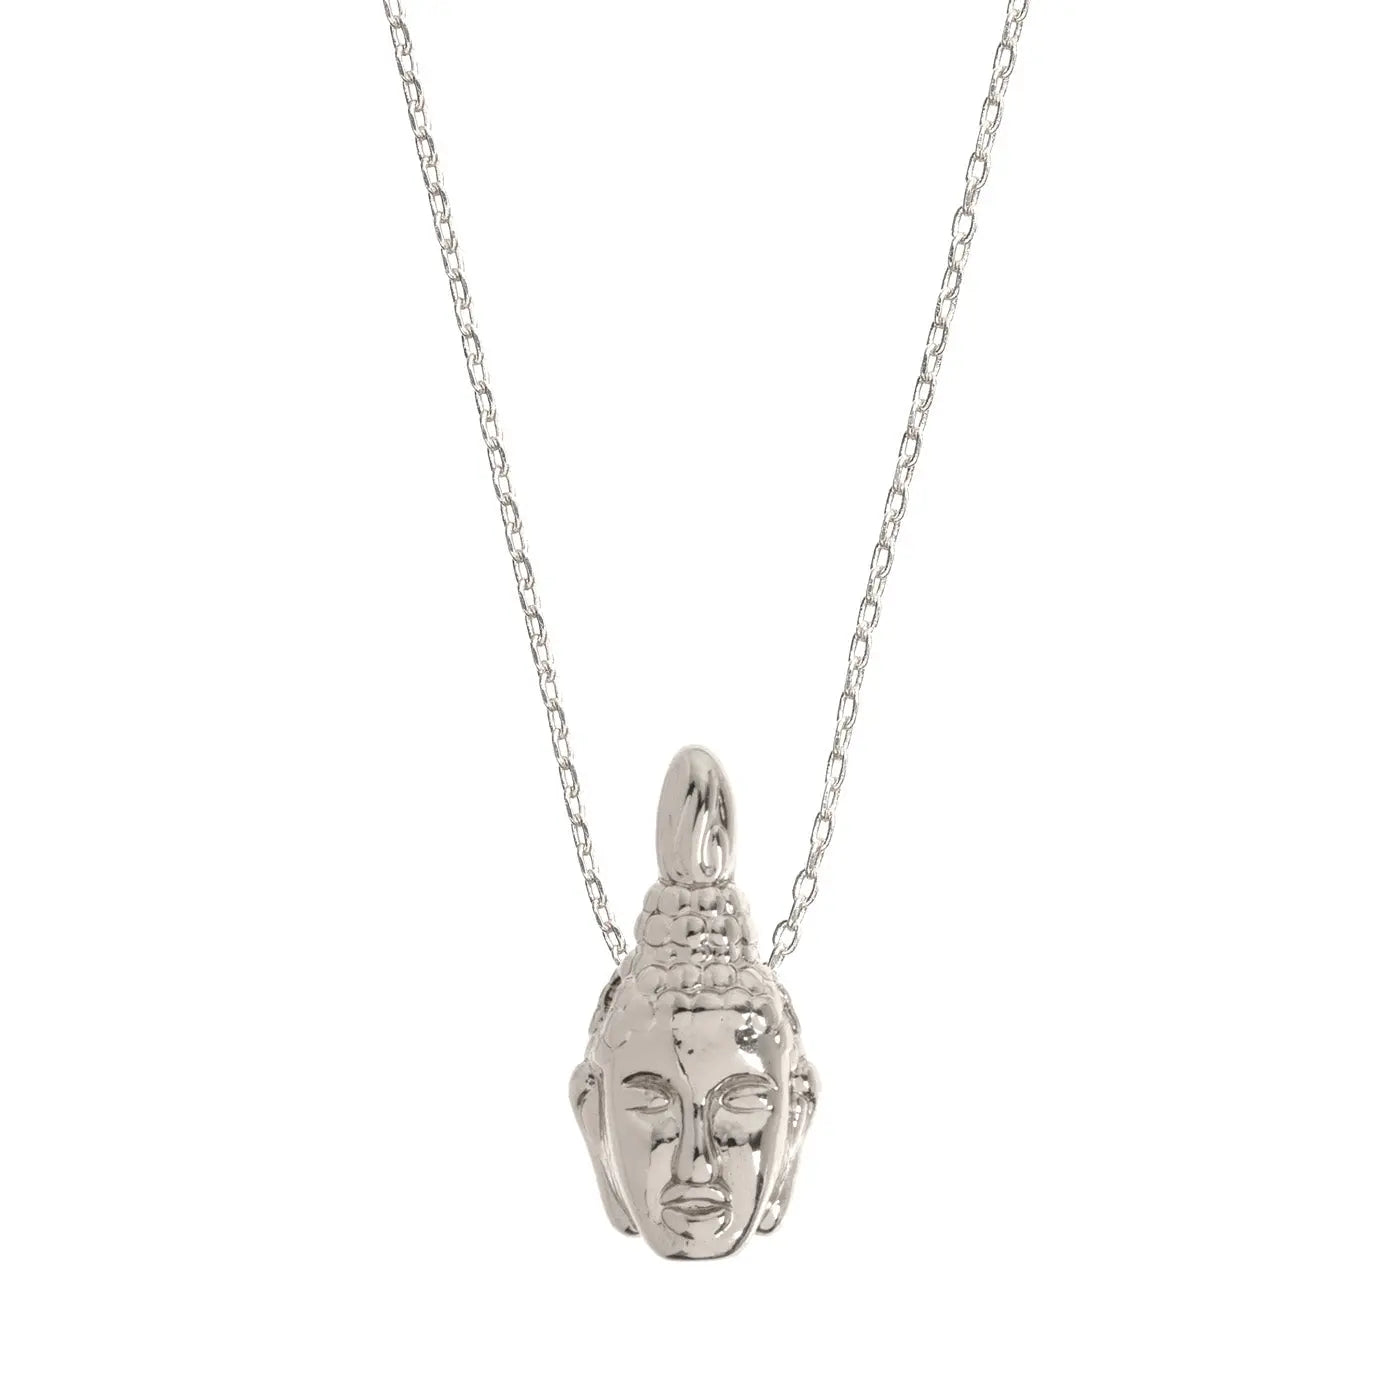 Buddha Necklace - Silver | Adjustable Chain